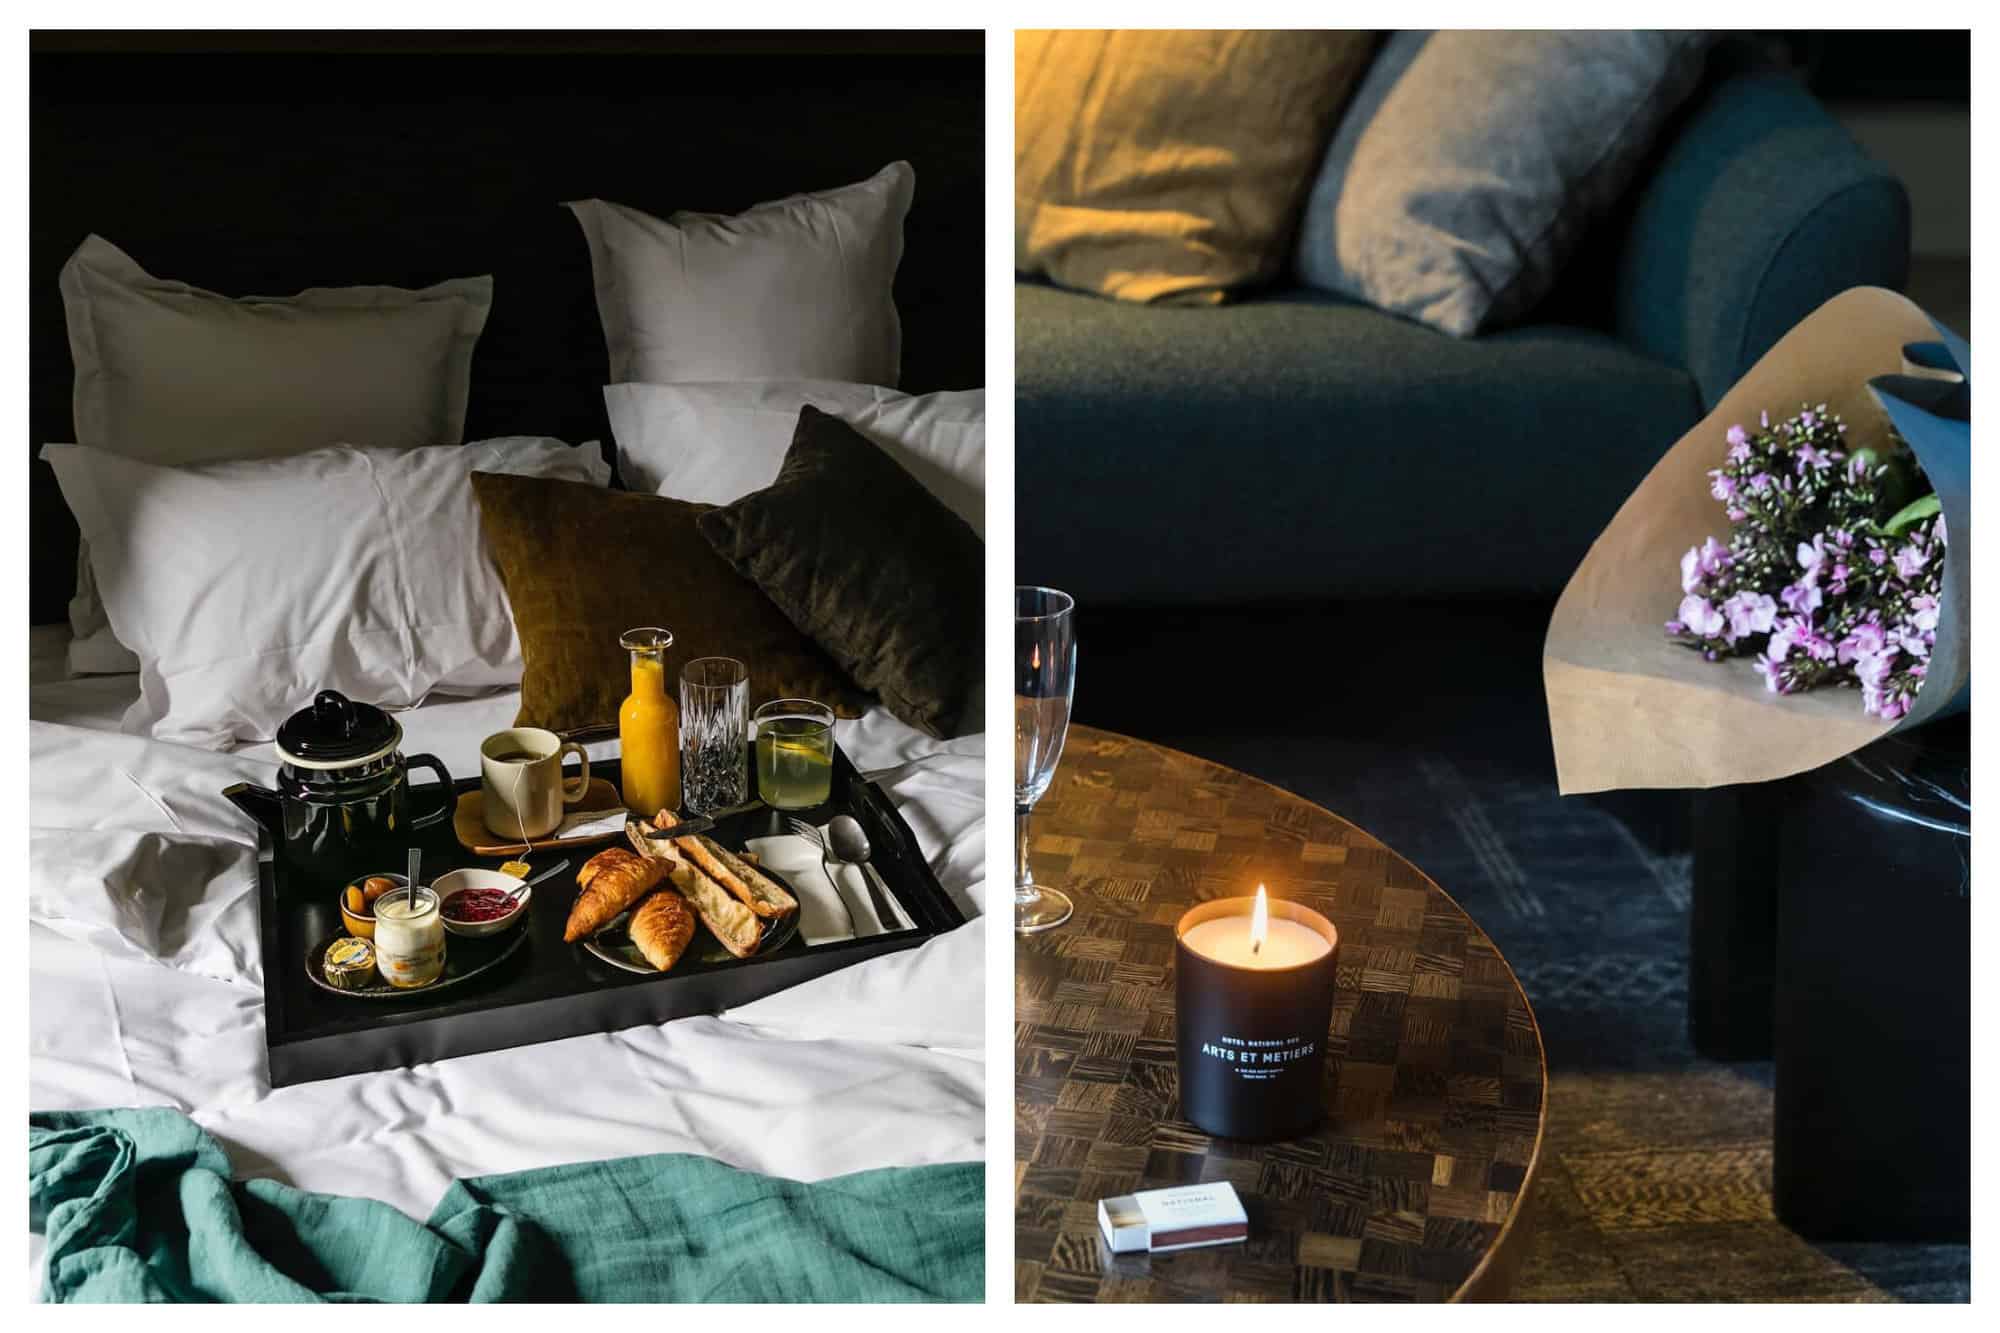 Left- A breakfast tray sits on a bed at Hôtel National des Arts Métiers.
Right- A candle burns on a small table next to a bouquet of purple flowers. 